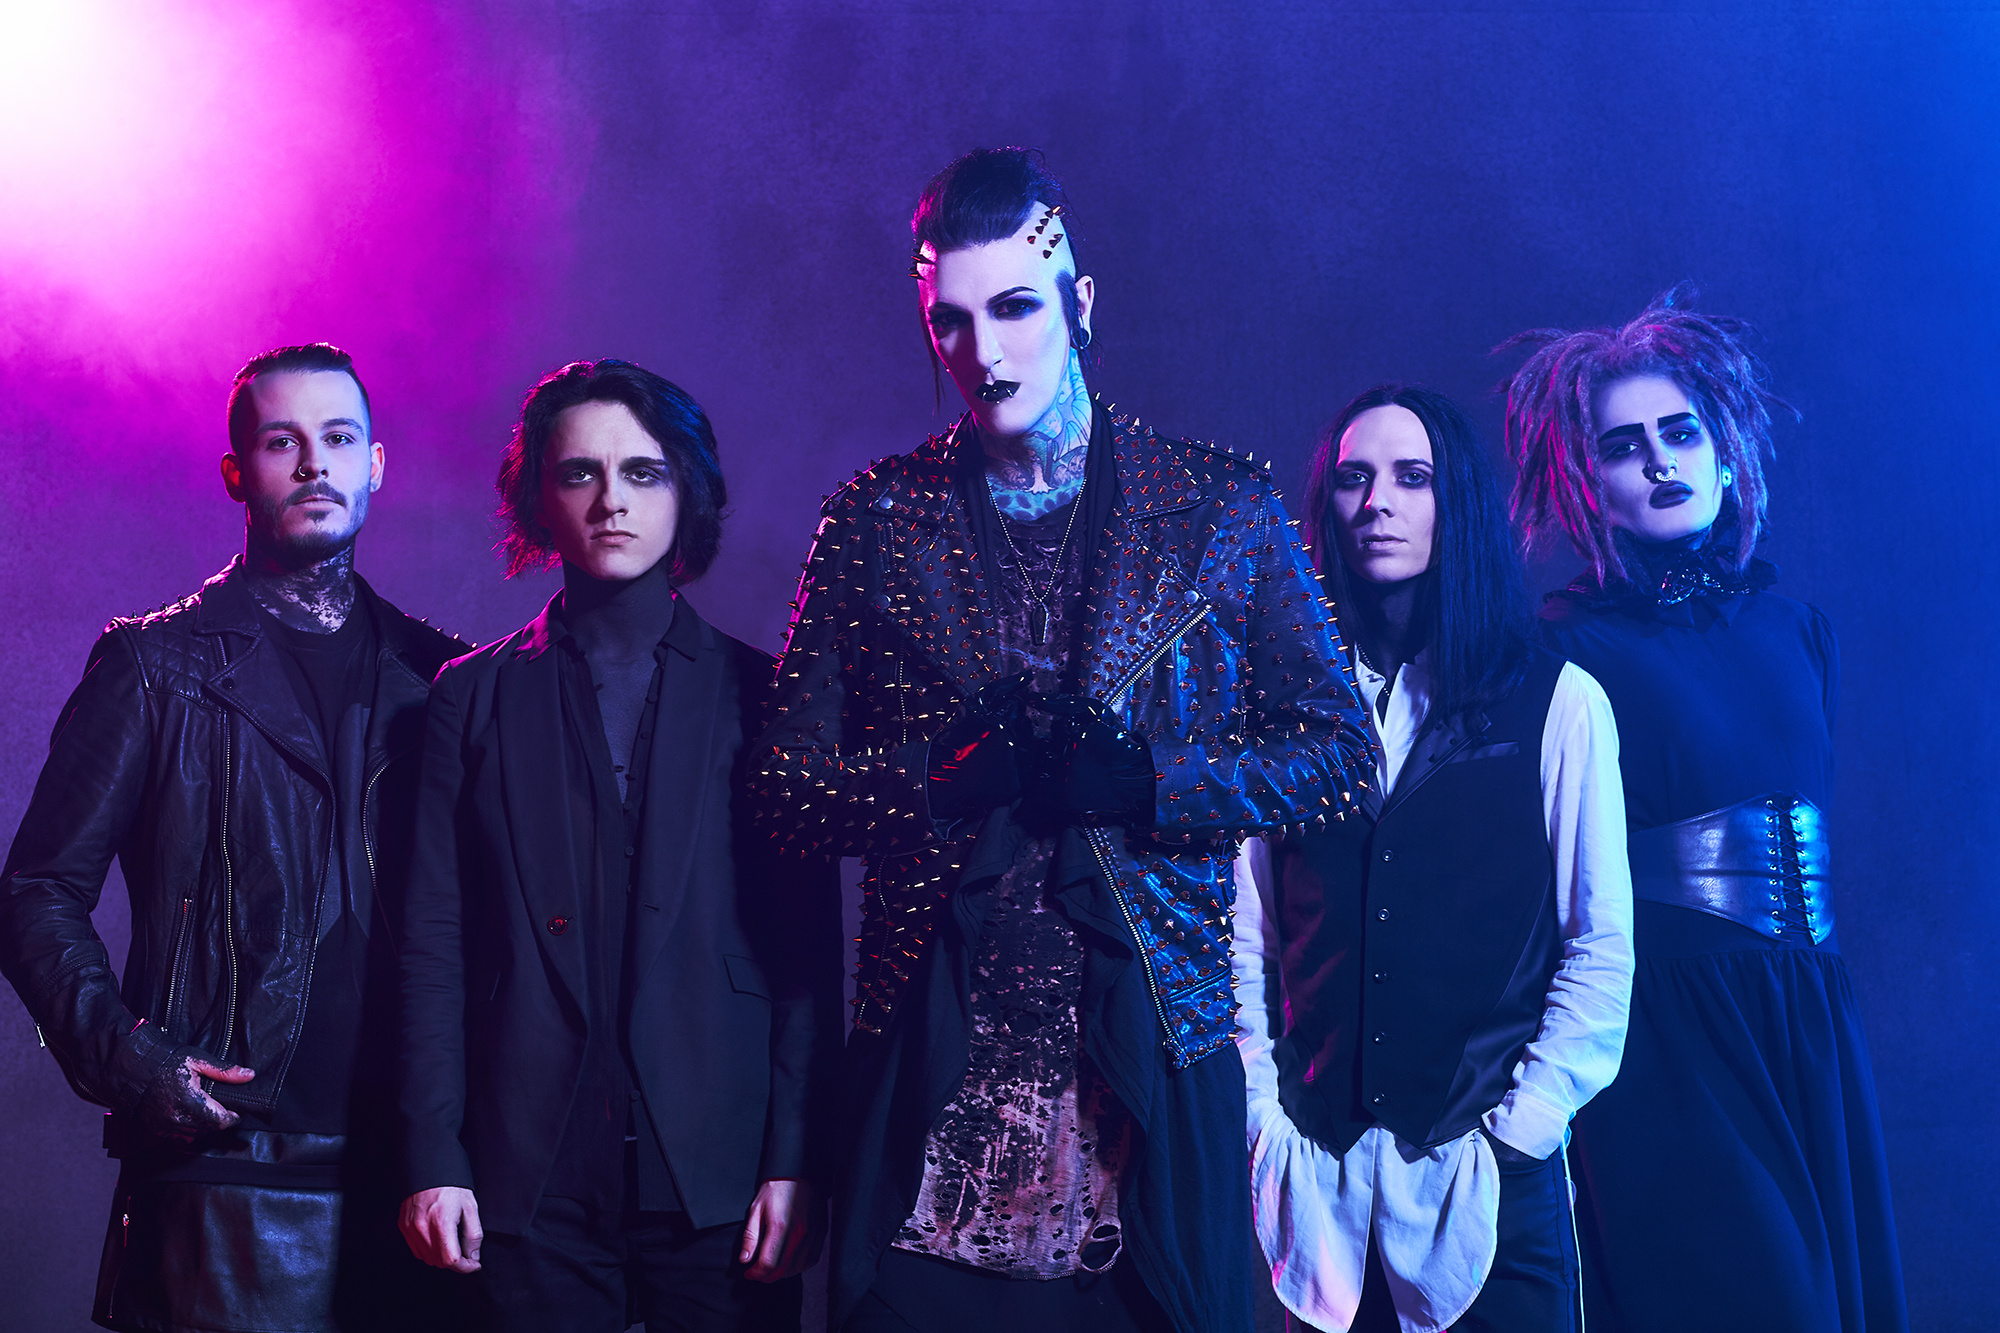 Motionless in White music, Band's photos, Ethan Walker's post, Band's subjects, 2000x1340 HD Desktop